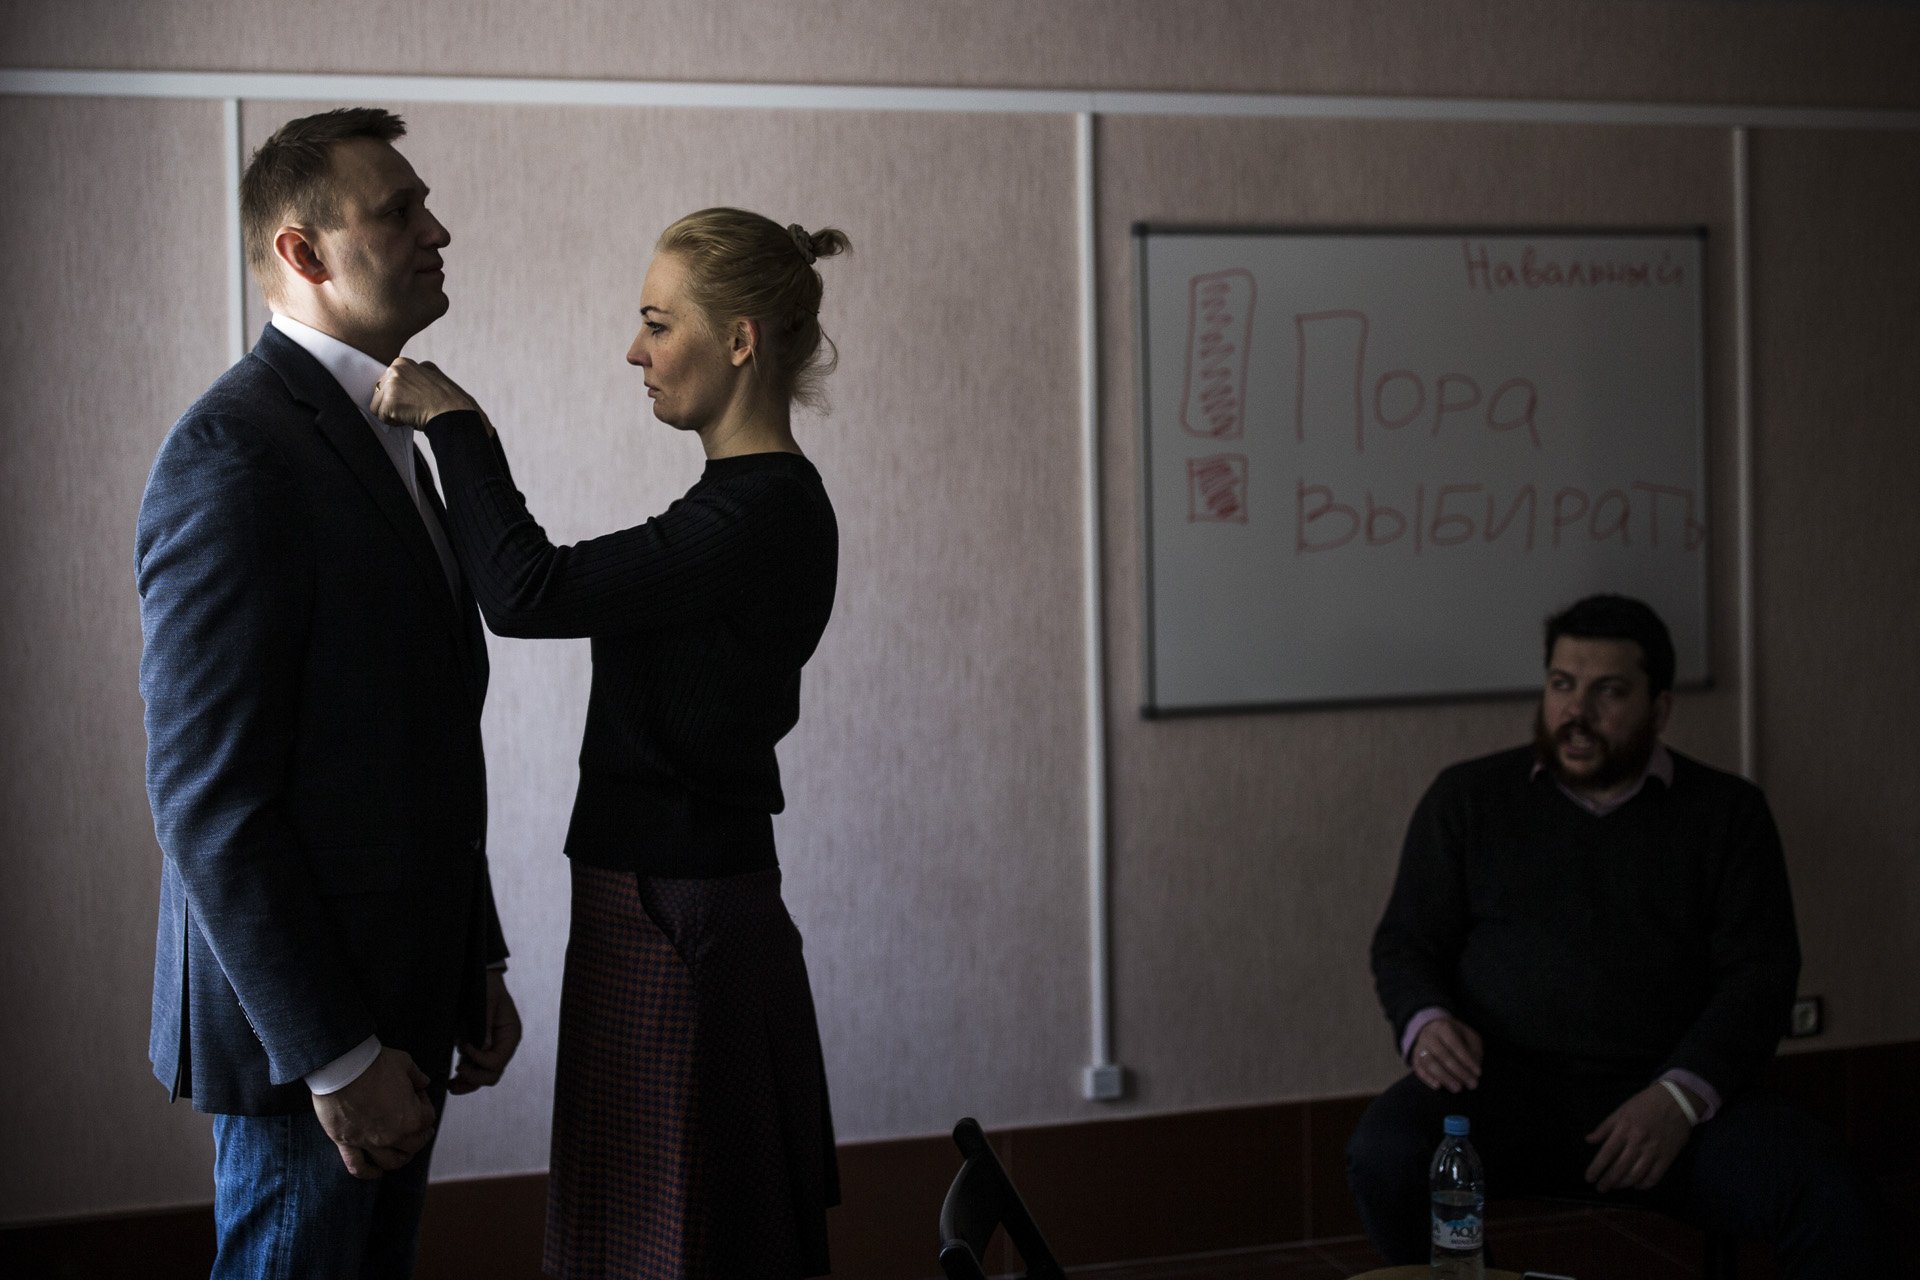  Alexey Navalny's wife Yulia prepares him for a press conference in Yekaterinburg, Russia on February 25, 2017. A couple of months earlier Navalny announced his presidential bid in order to challenge Vladimir Putin’s reelection for his fourth term.Th